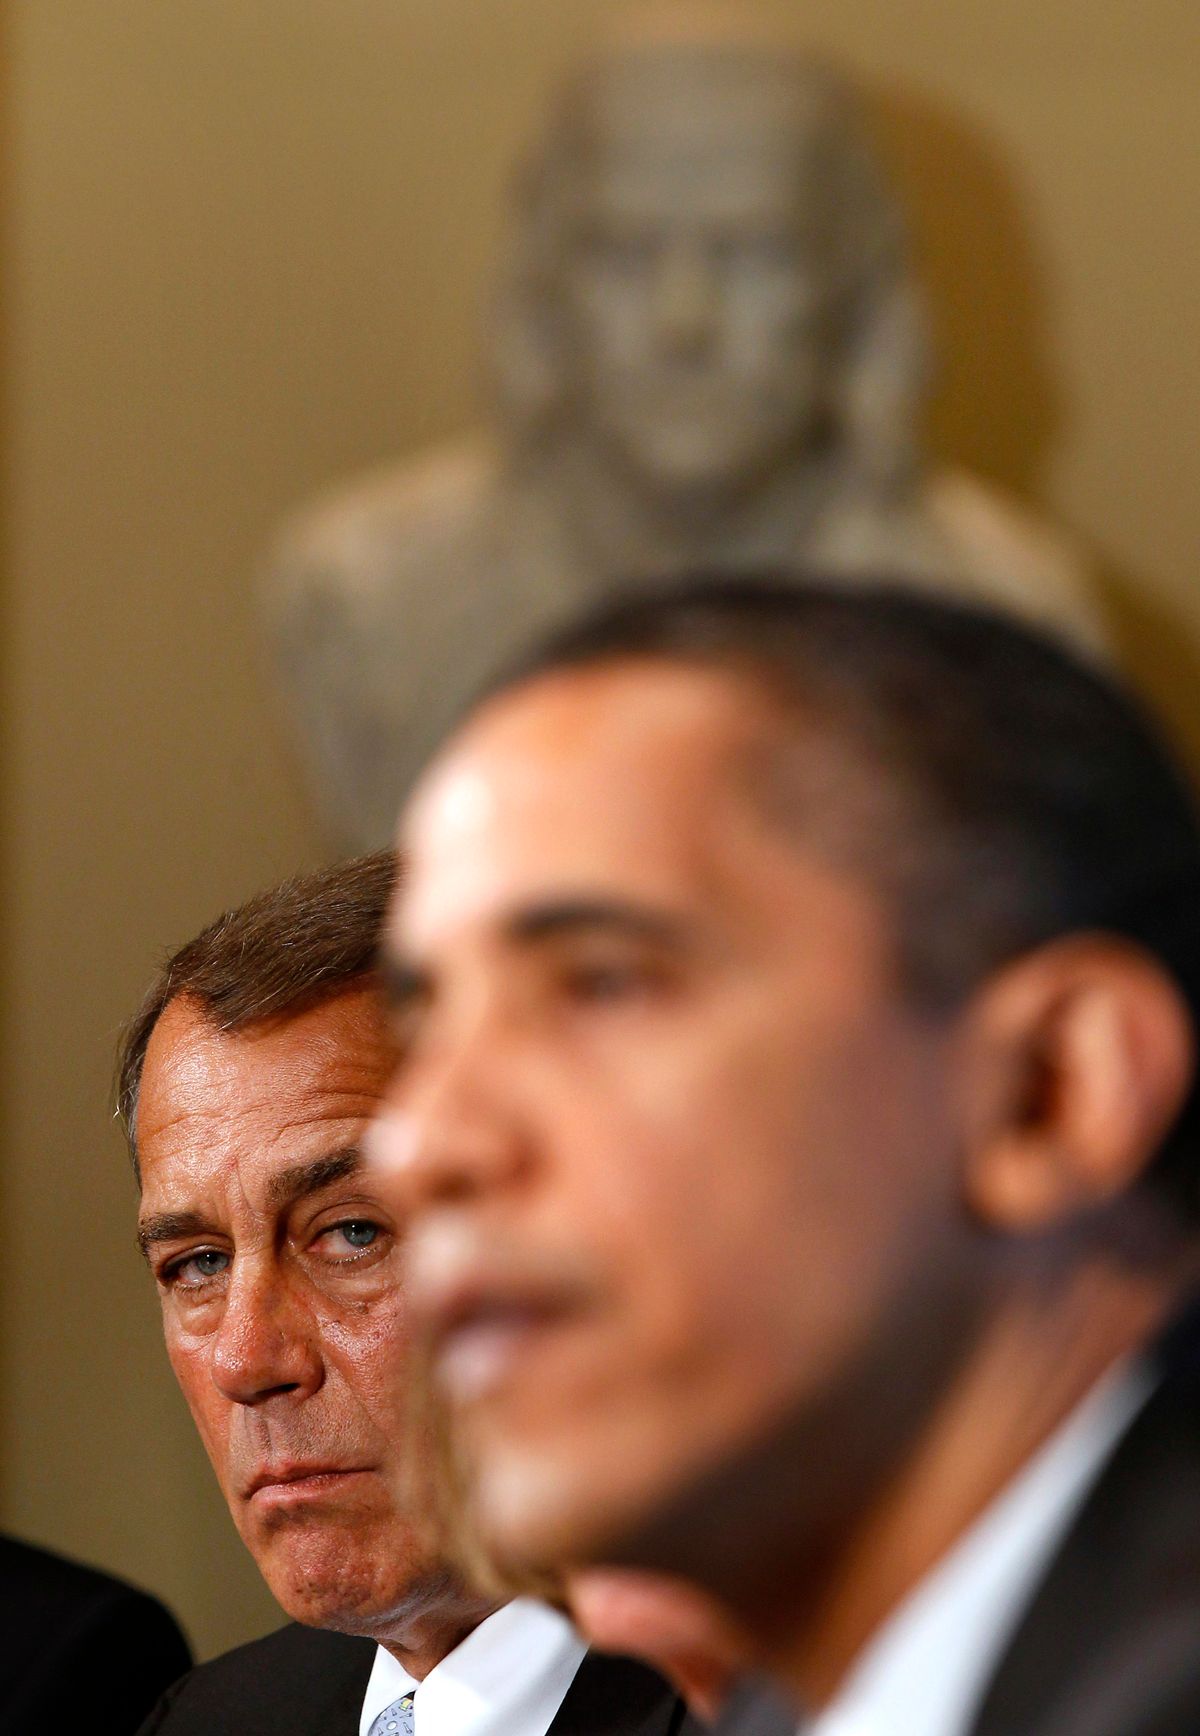 House Republican Leader John Boehner (L) watches as U.S. President Barack Obama meets with Congressional bi-partisan leaders in the Cabinet Room of the White House in Washington June 10, 2010.      REUTERS/Larry Downing (UNITED STATES - Tags: POLITICS) (Â© Larry Downing / Reuters)